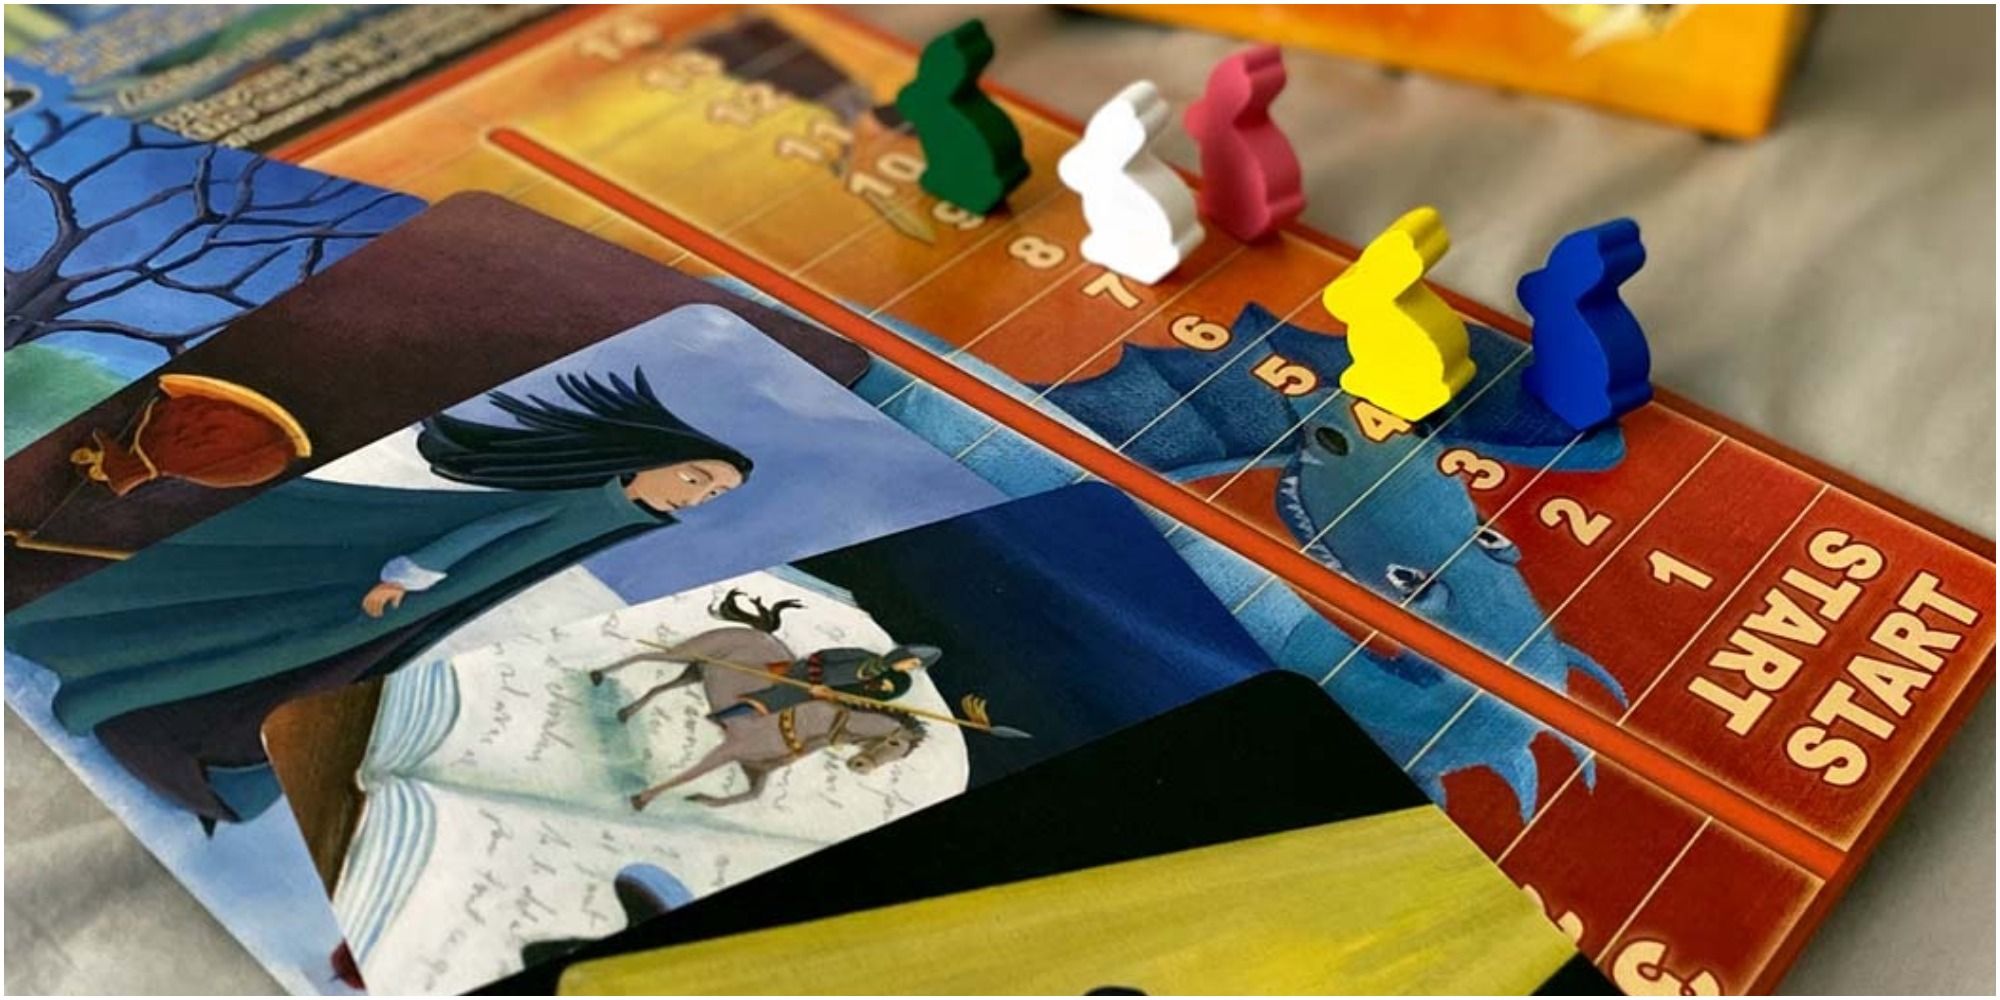 Cards and markers from the game Dixit